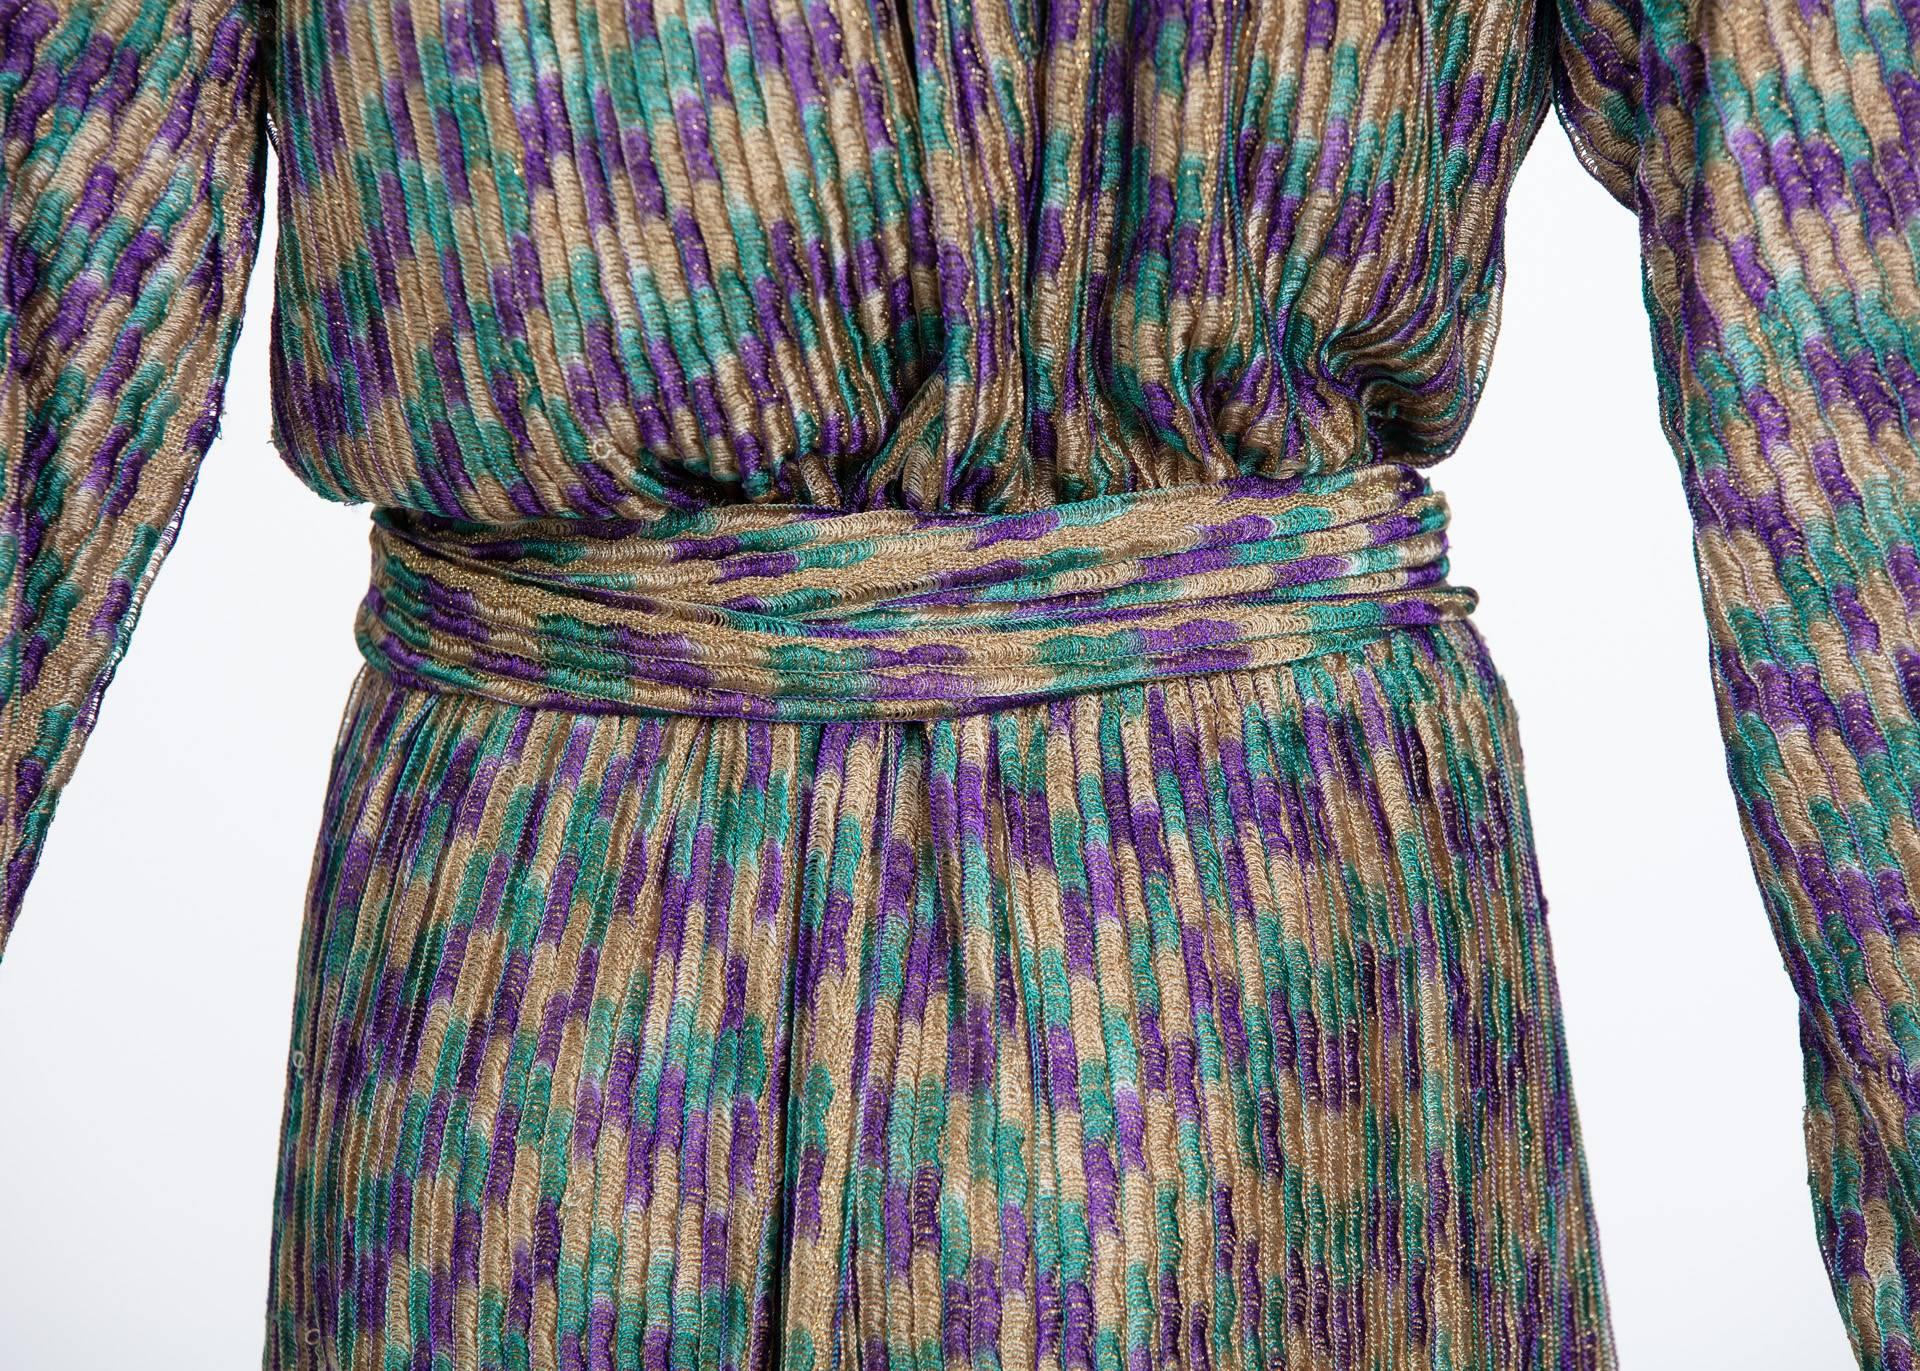 Missoni Multicolored Jewel Tone Metallic Knit Belted Dress, 1970s  For Sale 2